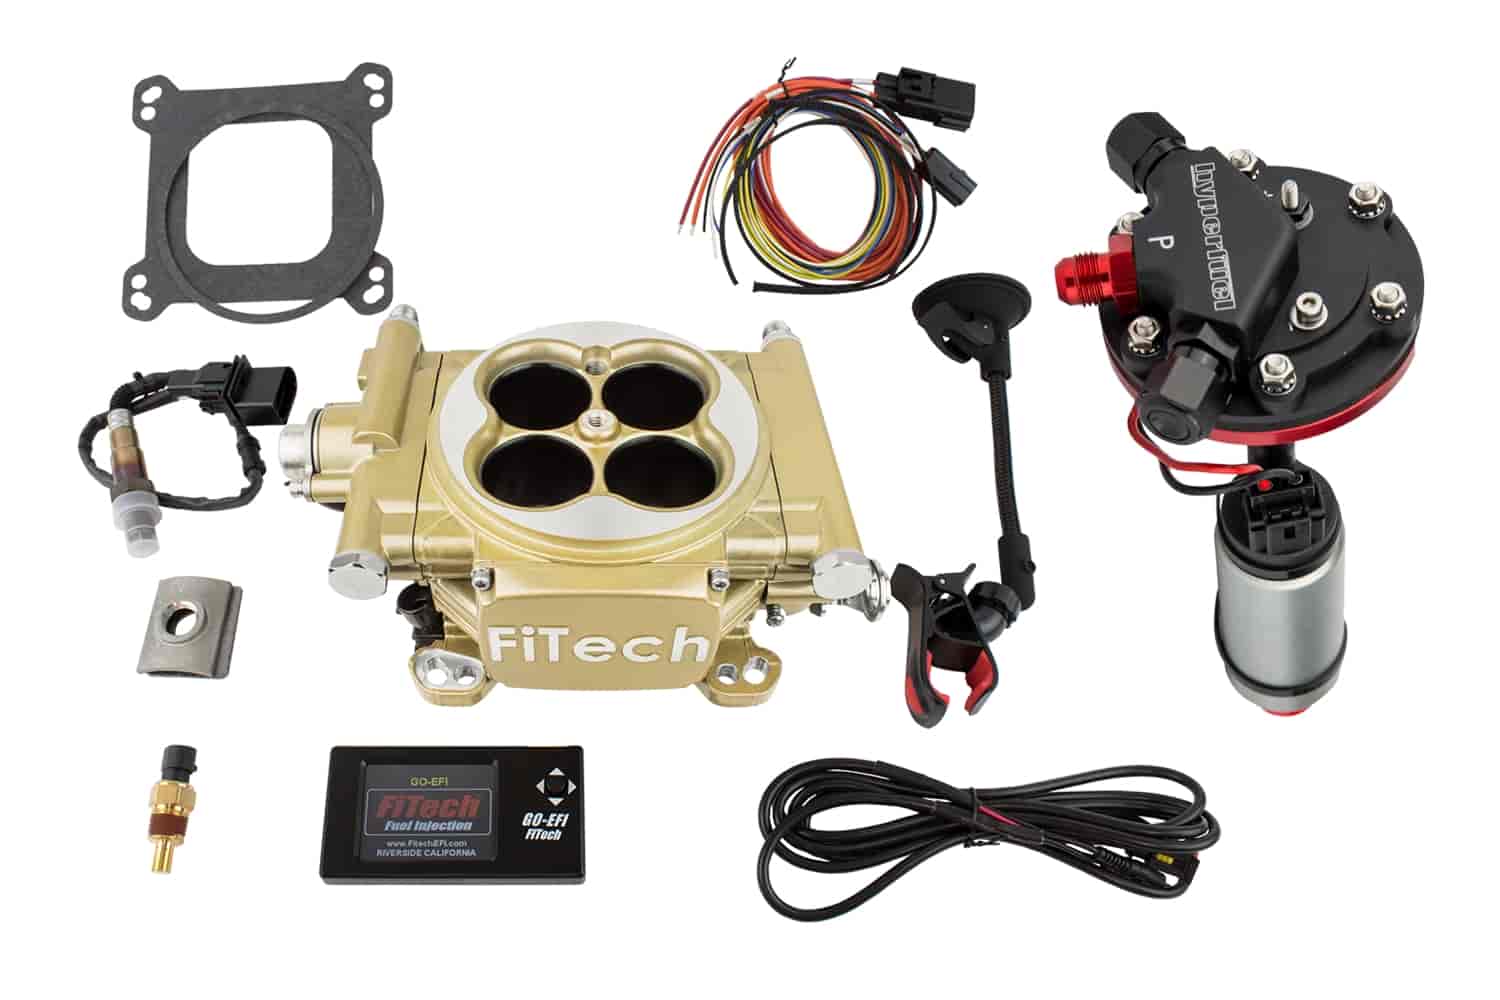 Easy Street EFI 600 HP Throttle Body System Master Kit Includes: Hy-Fuel Tight-Fit In-Tank Retrofit Kit